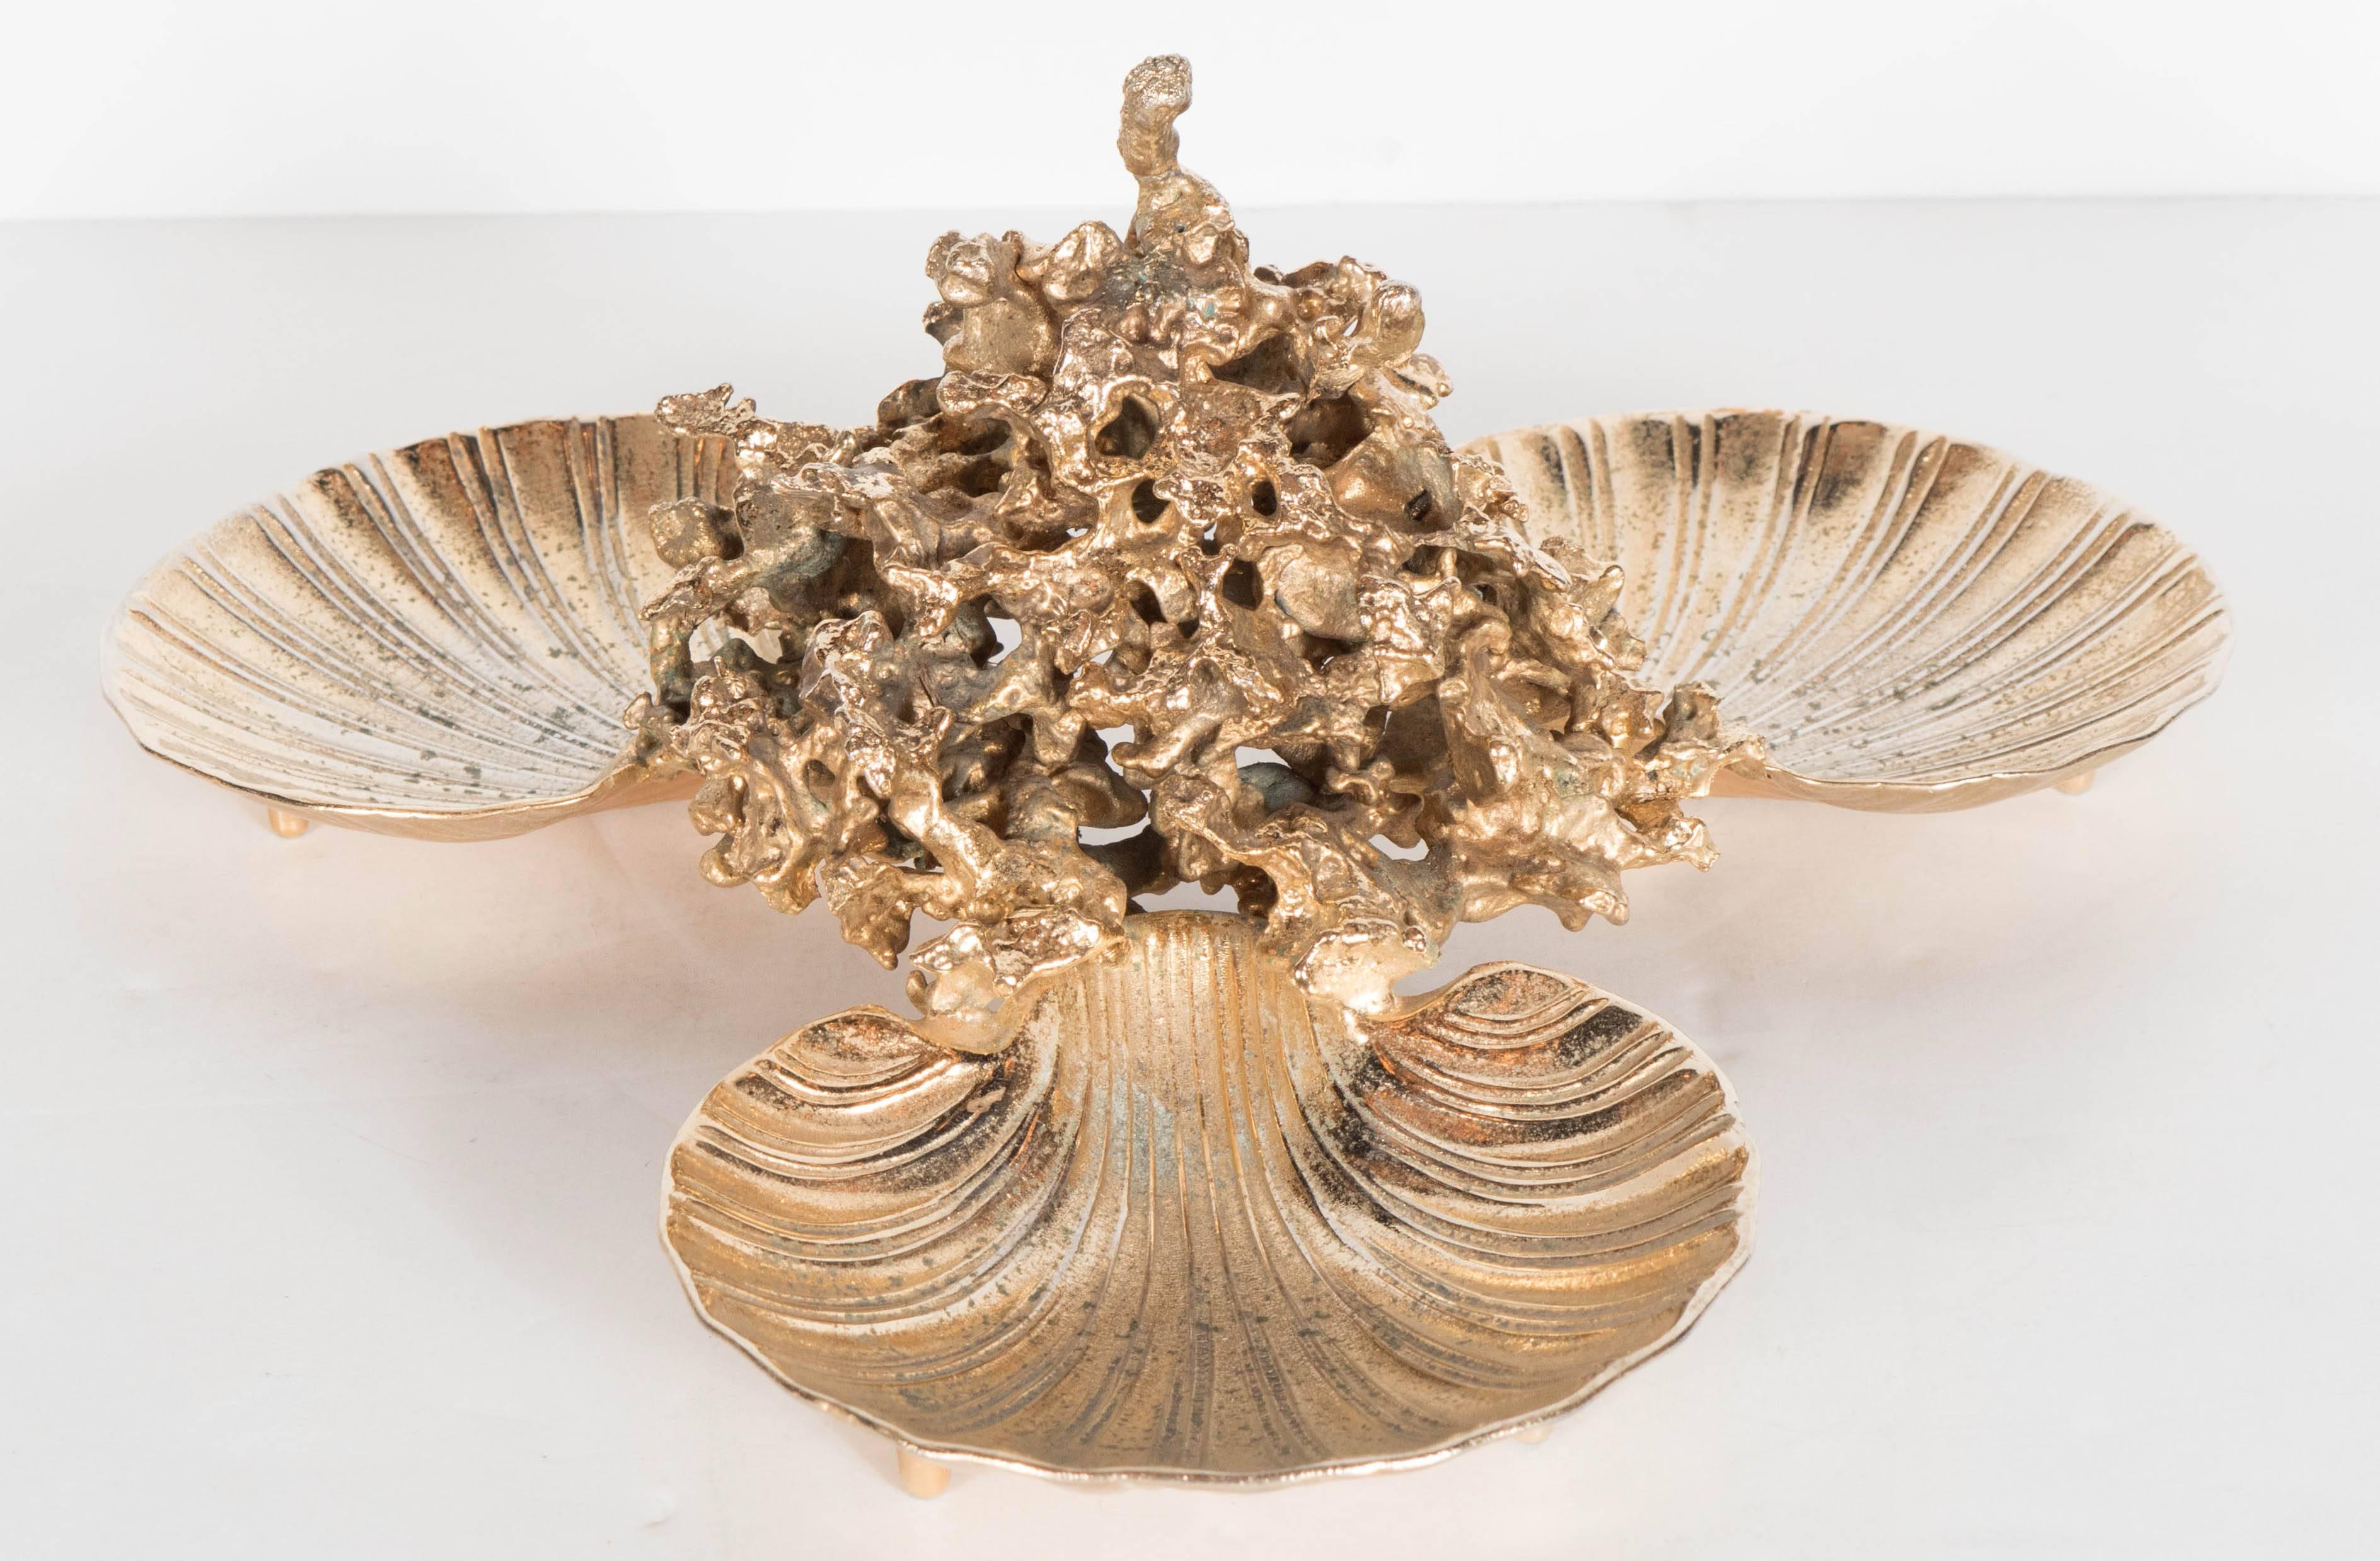 A stunning bronze dish set in 24-karat gilt finish signed by Claude Victor Boeltz. An organic sculptural center supports three shells which can be used as dishes or catch-alls. This piece is from his 